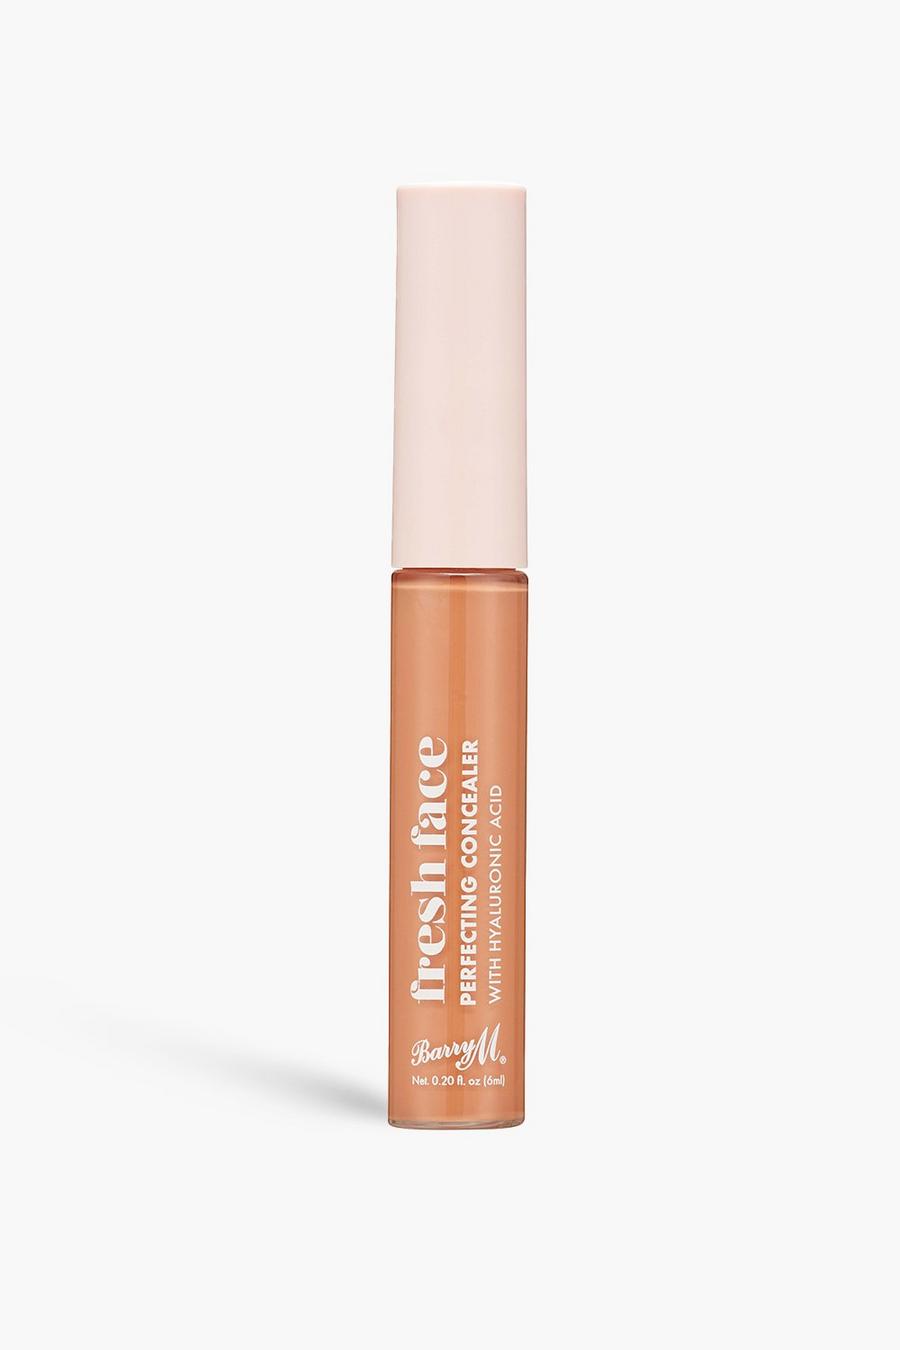 Tan marrone Barry M Fresh Face Perfecting Concealer 8